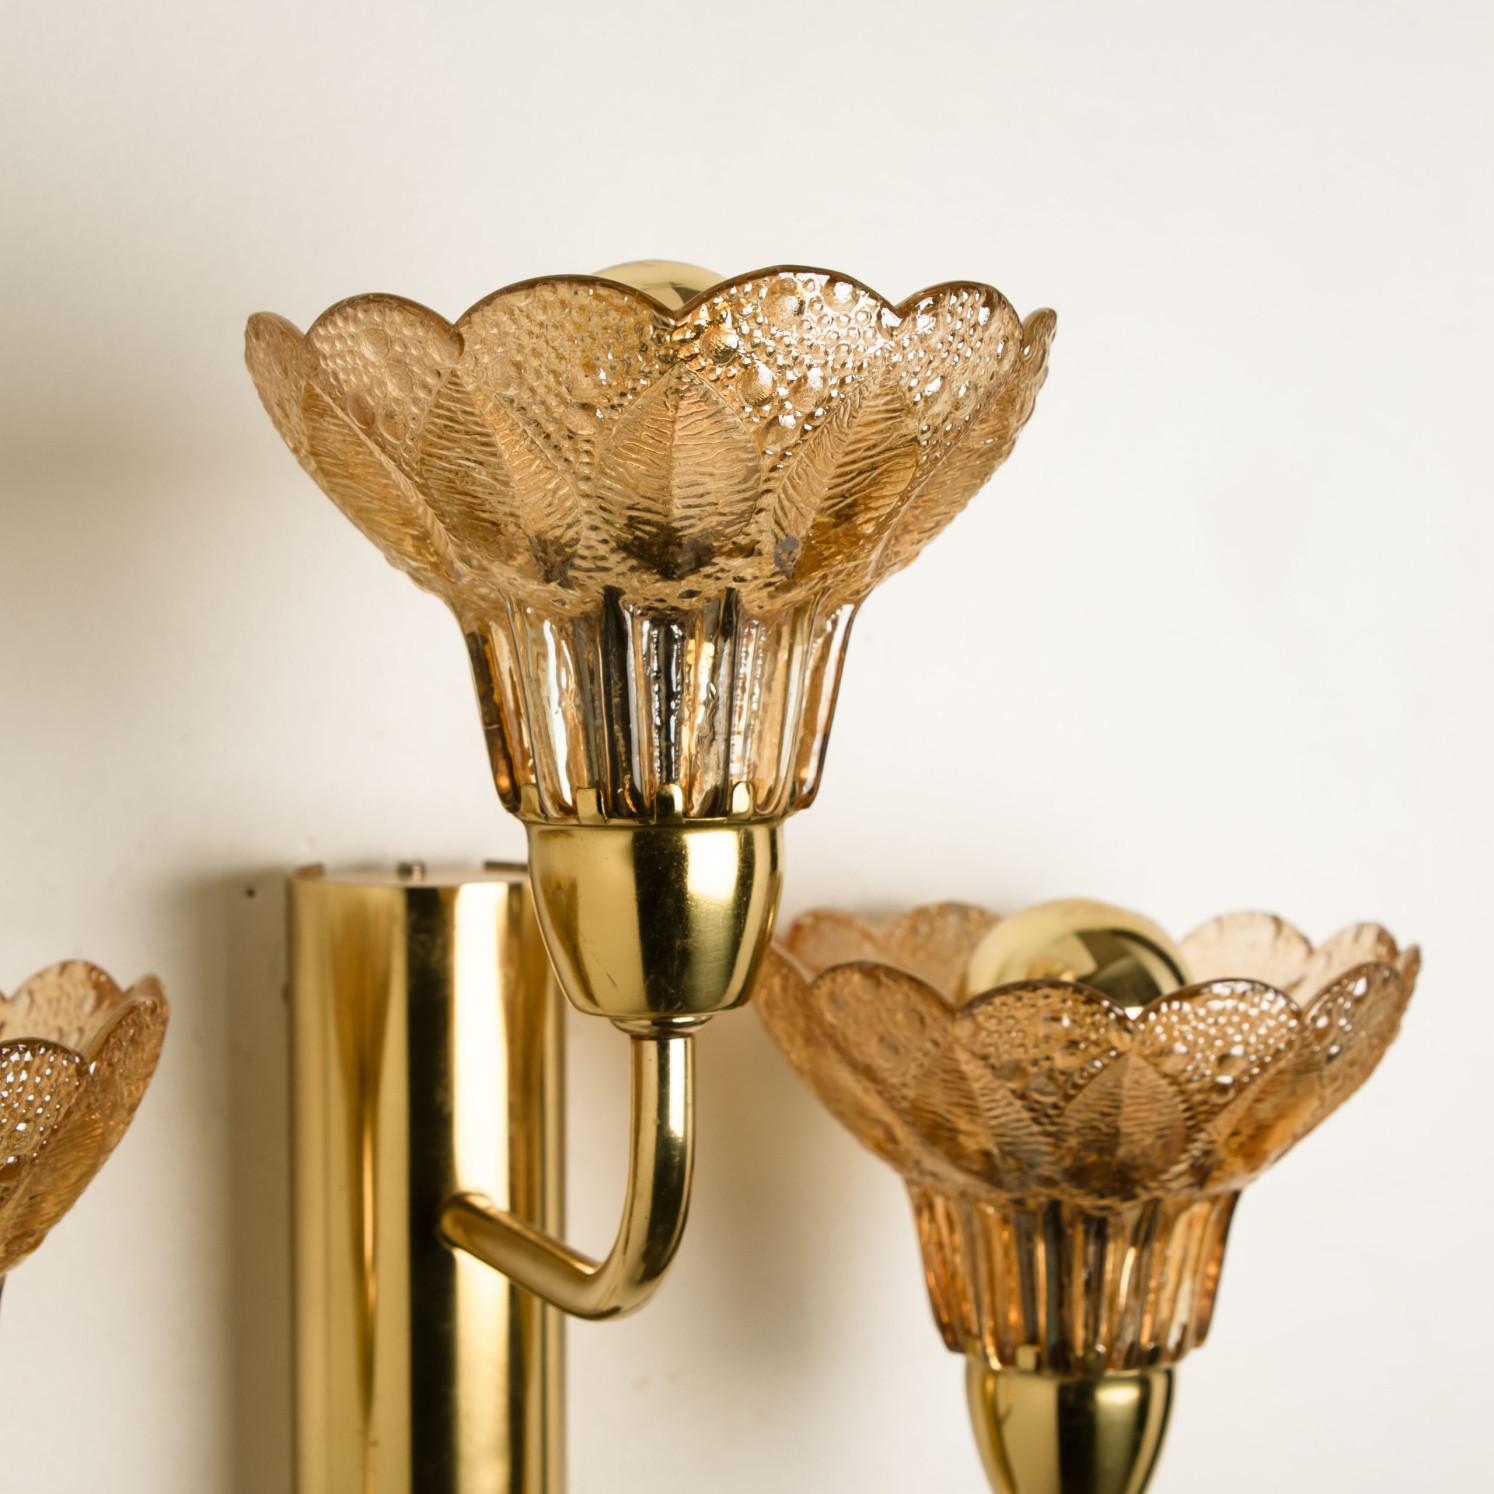 Several Flower Glass and Brass Wall Sconces, Germany, 1960s For Sale 5